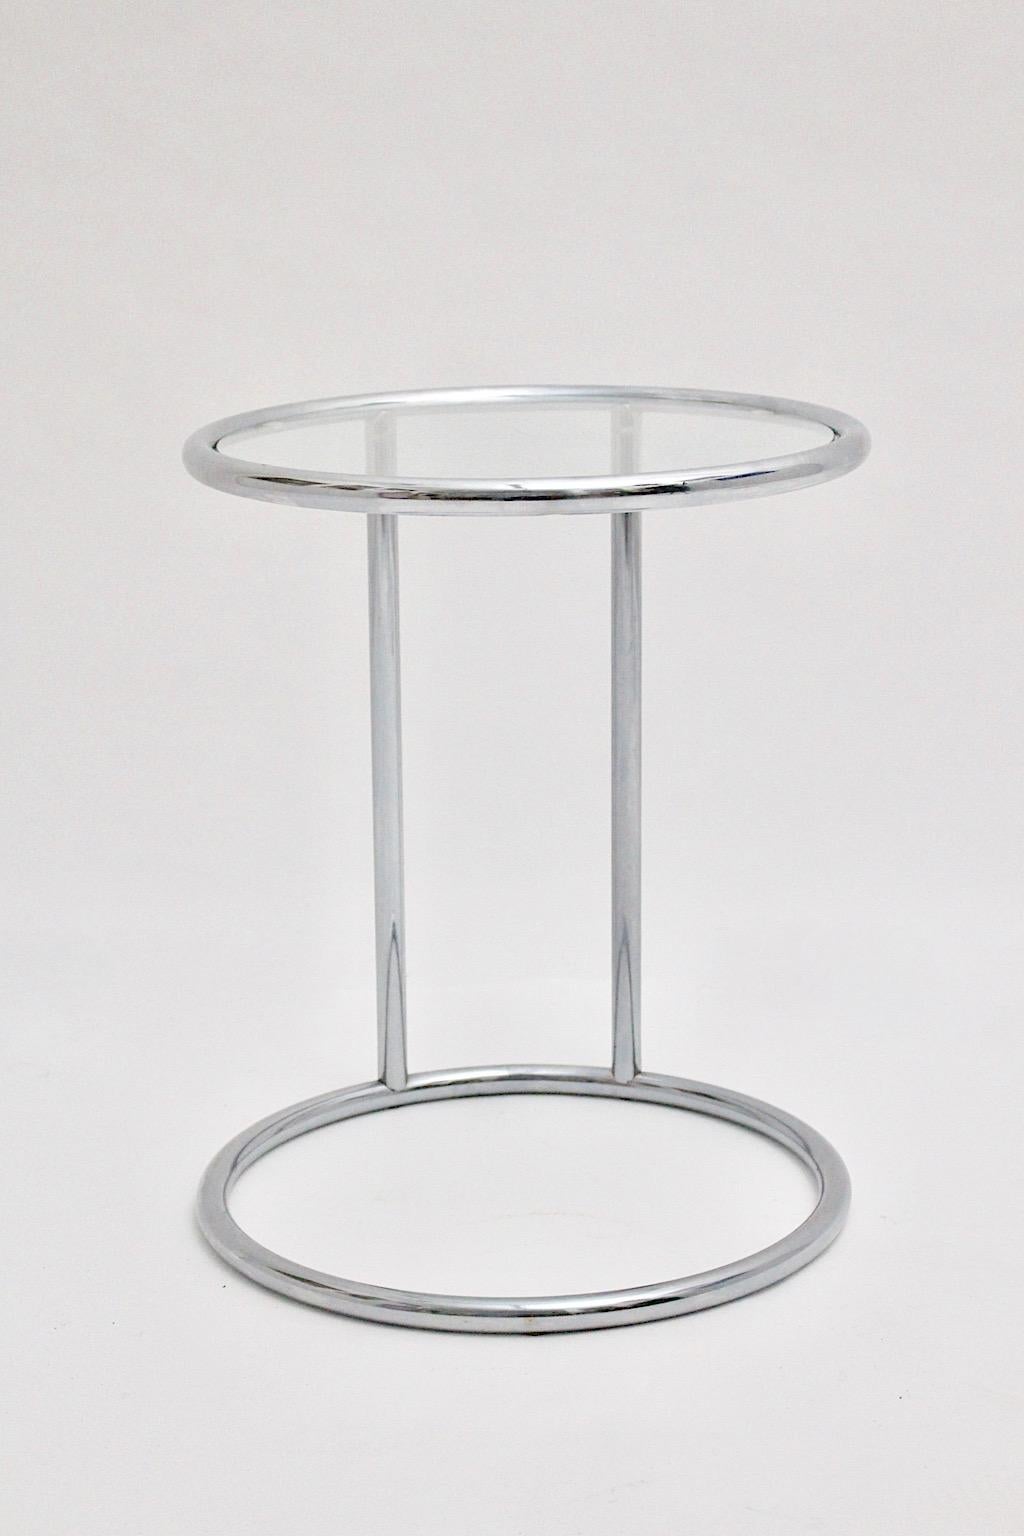 Italian Modernist Chromed Metal Clear Glass Vintage Side Table Italy 1980s For Sale